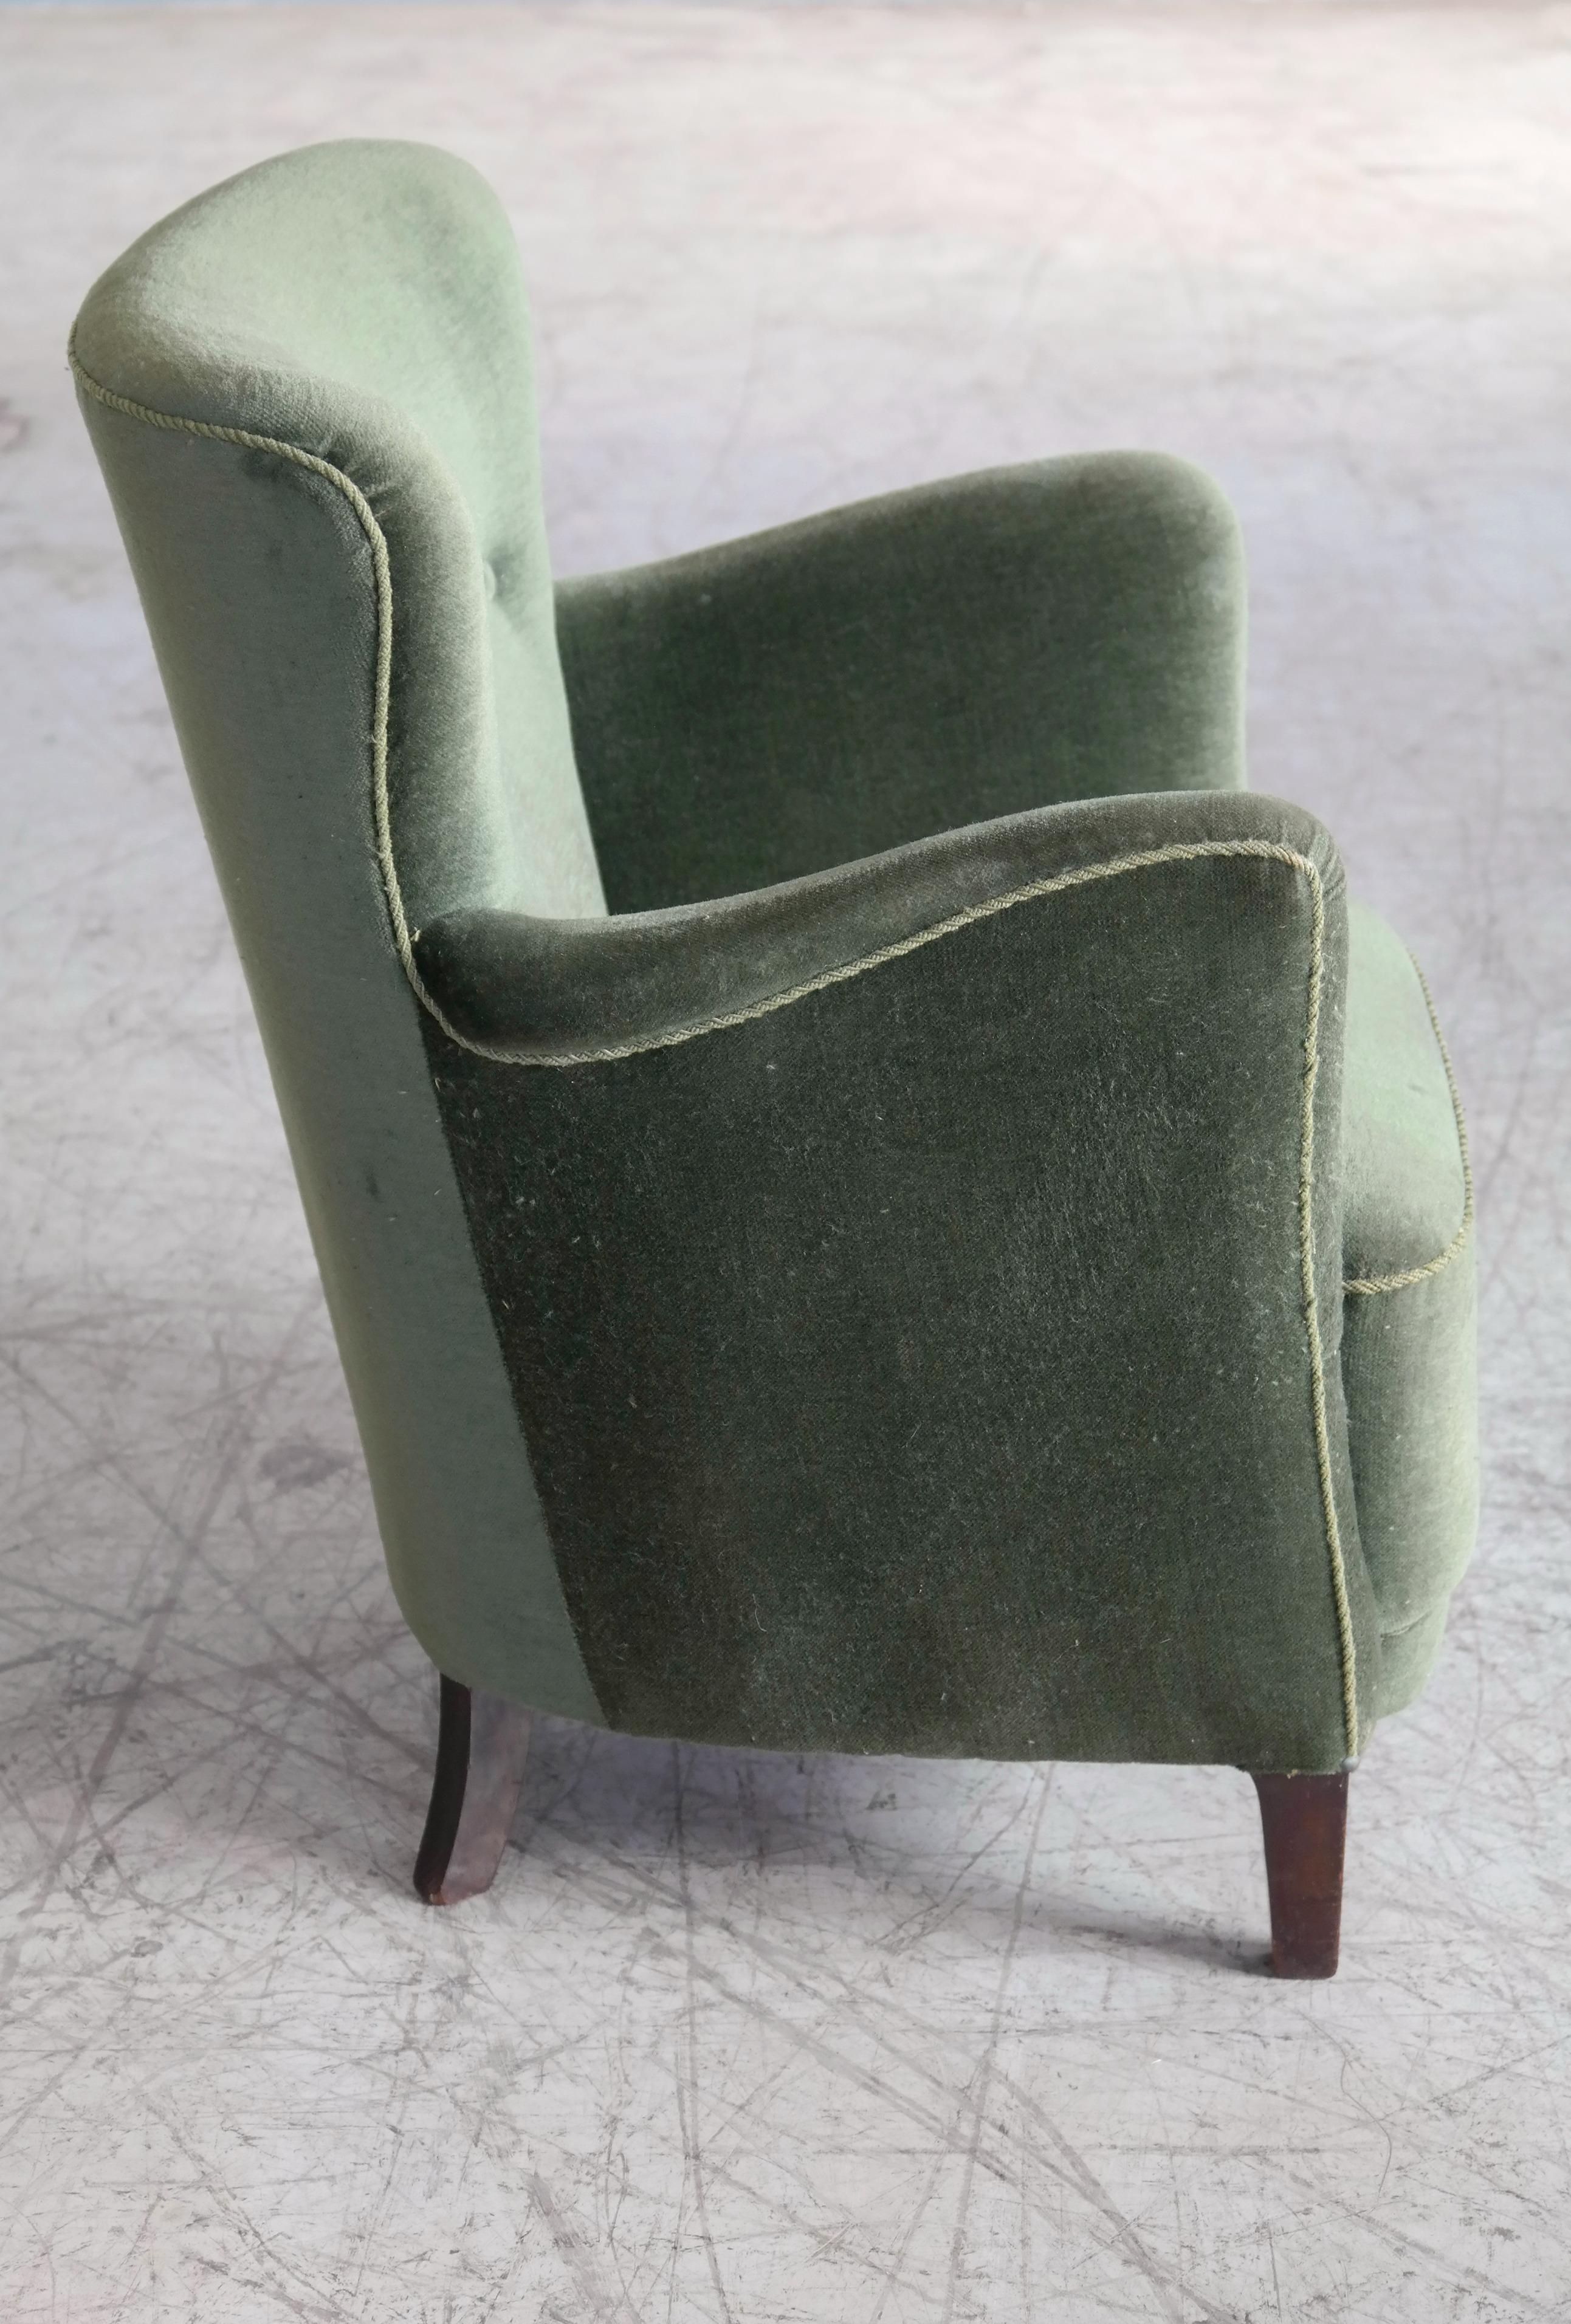 Danish 1940s Small Scale Lounge or Club Chair in Style of Fritz Hansen 1